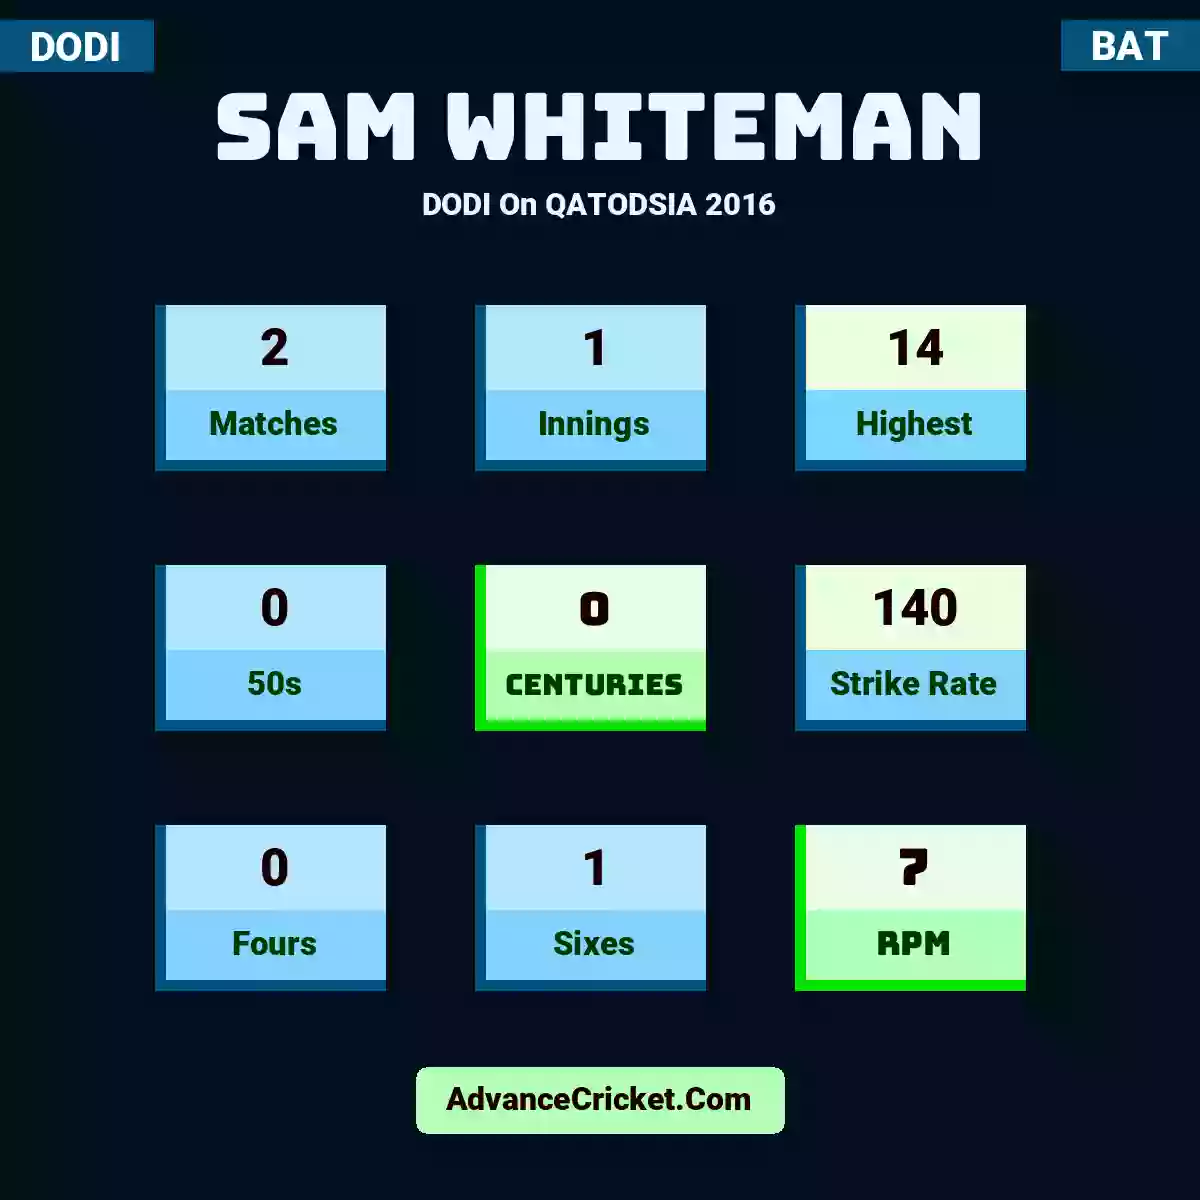 Sam Whiteman DODI  On QATODSIA 2016, Sam Whiteman played 2 matches, scored 14 runs as highest, 0 half-centuries, and 0 centuries, with a strike rate of 140. S.Whiteman hit 0 fours and 1 sixes, with an RPM of 7.